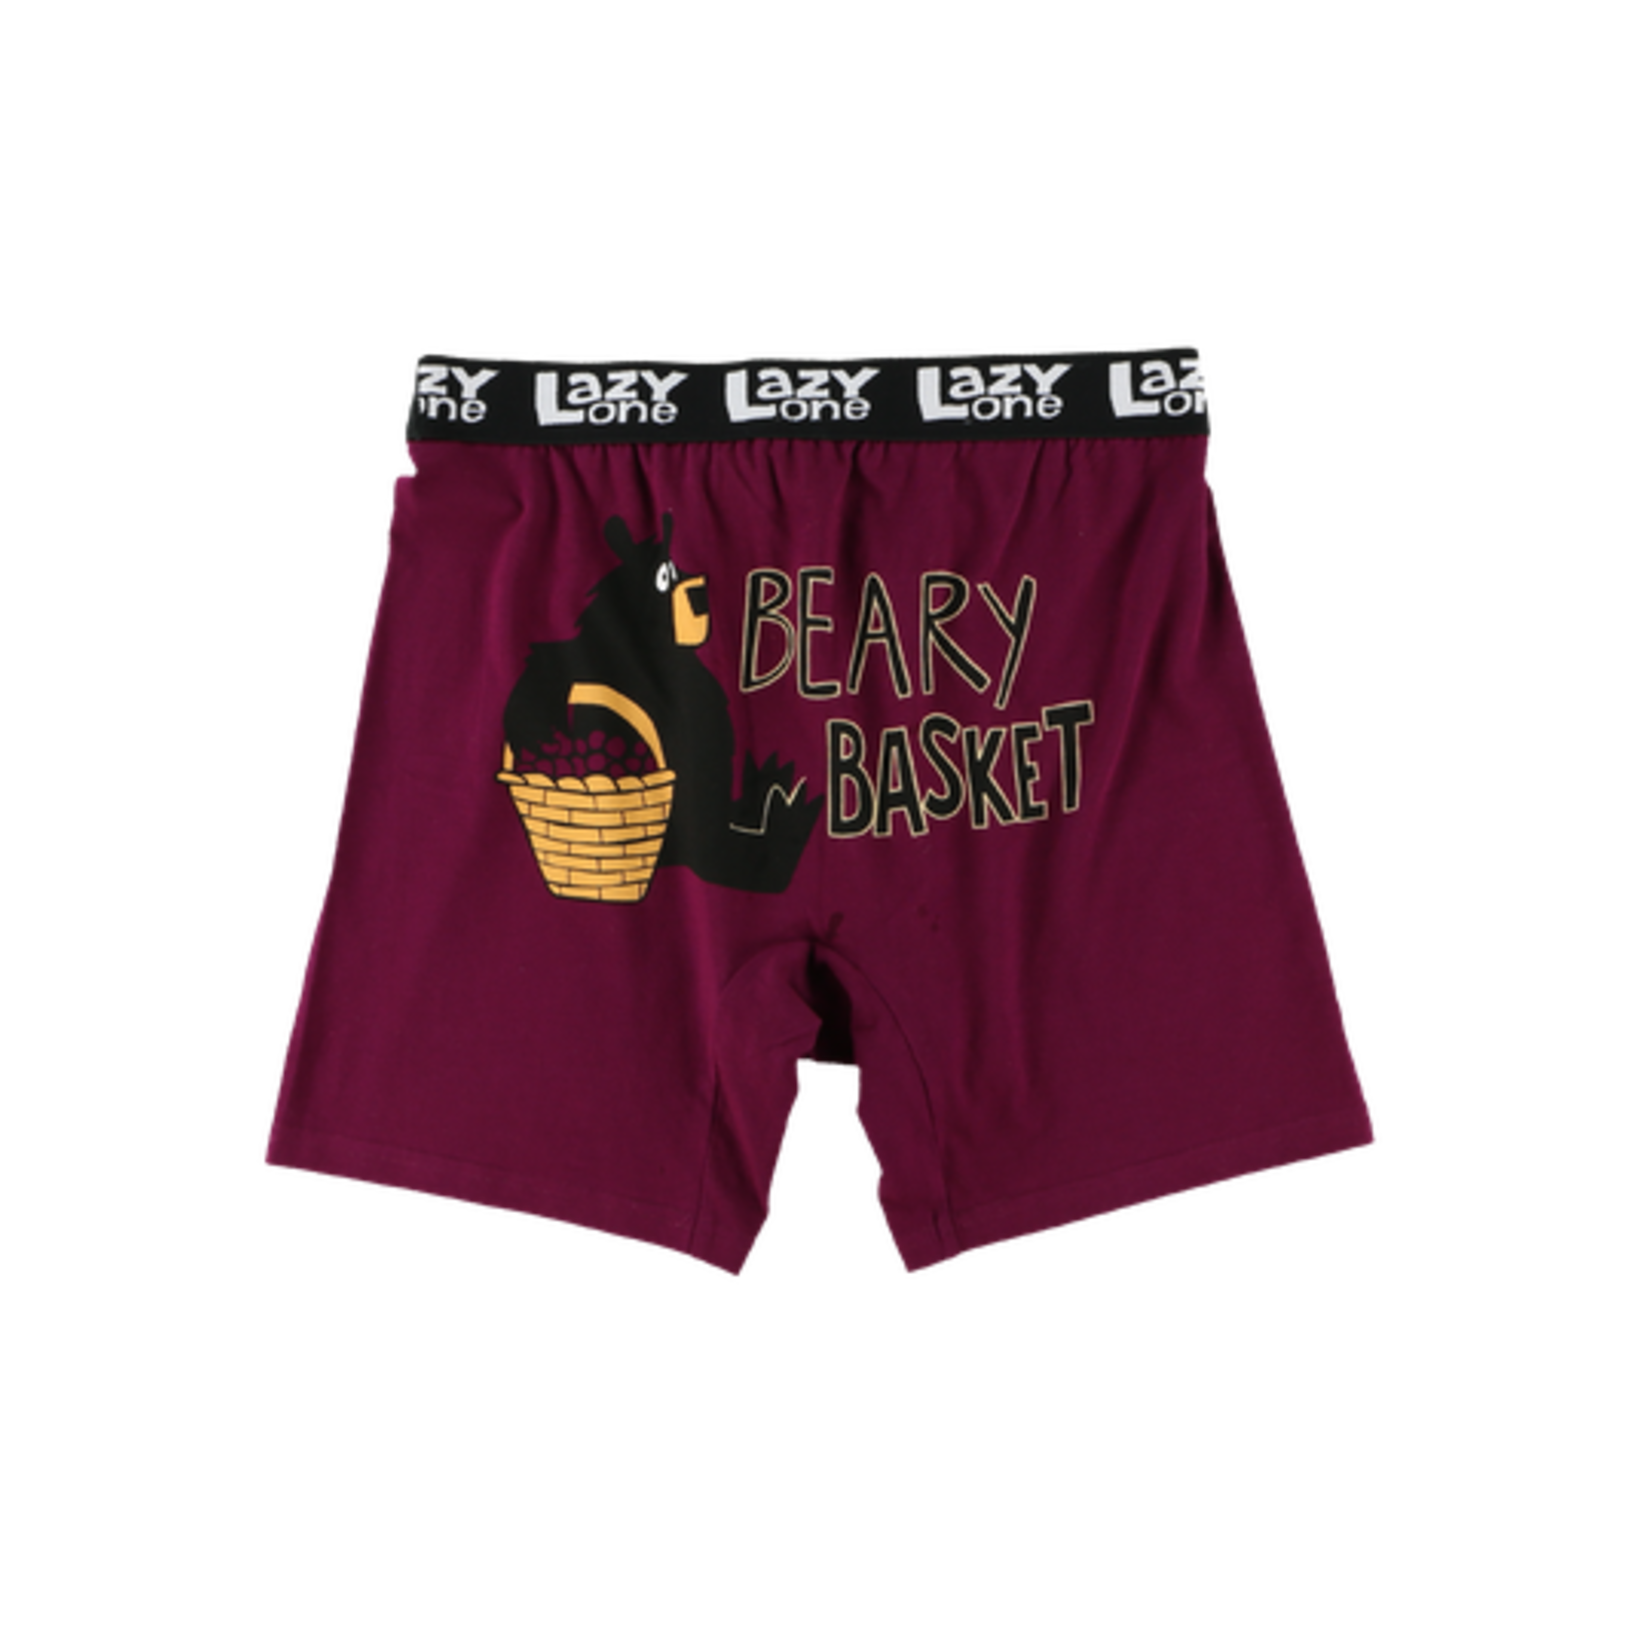 BEARY BASKET BOXER BRIEF